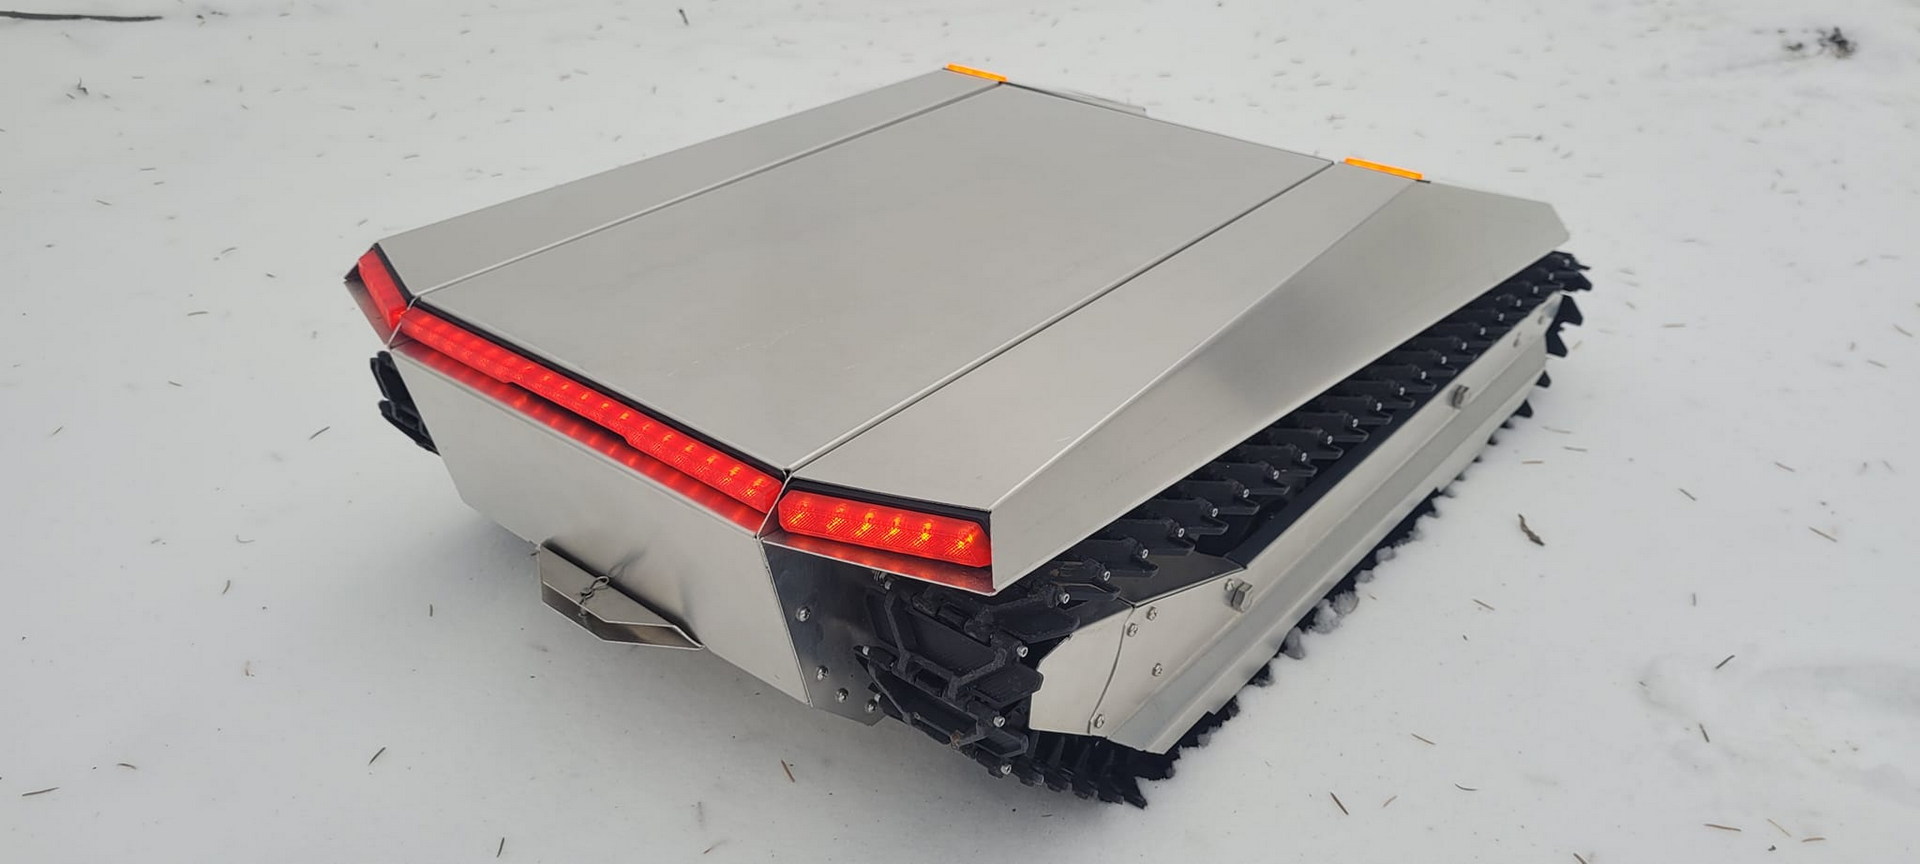 CyberKAT Is A Cybertruck-Inspired Remote Controlled Snowcat That